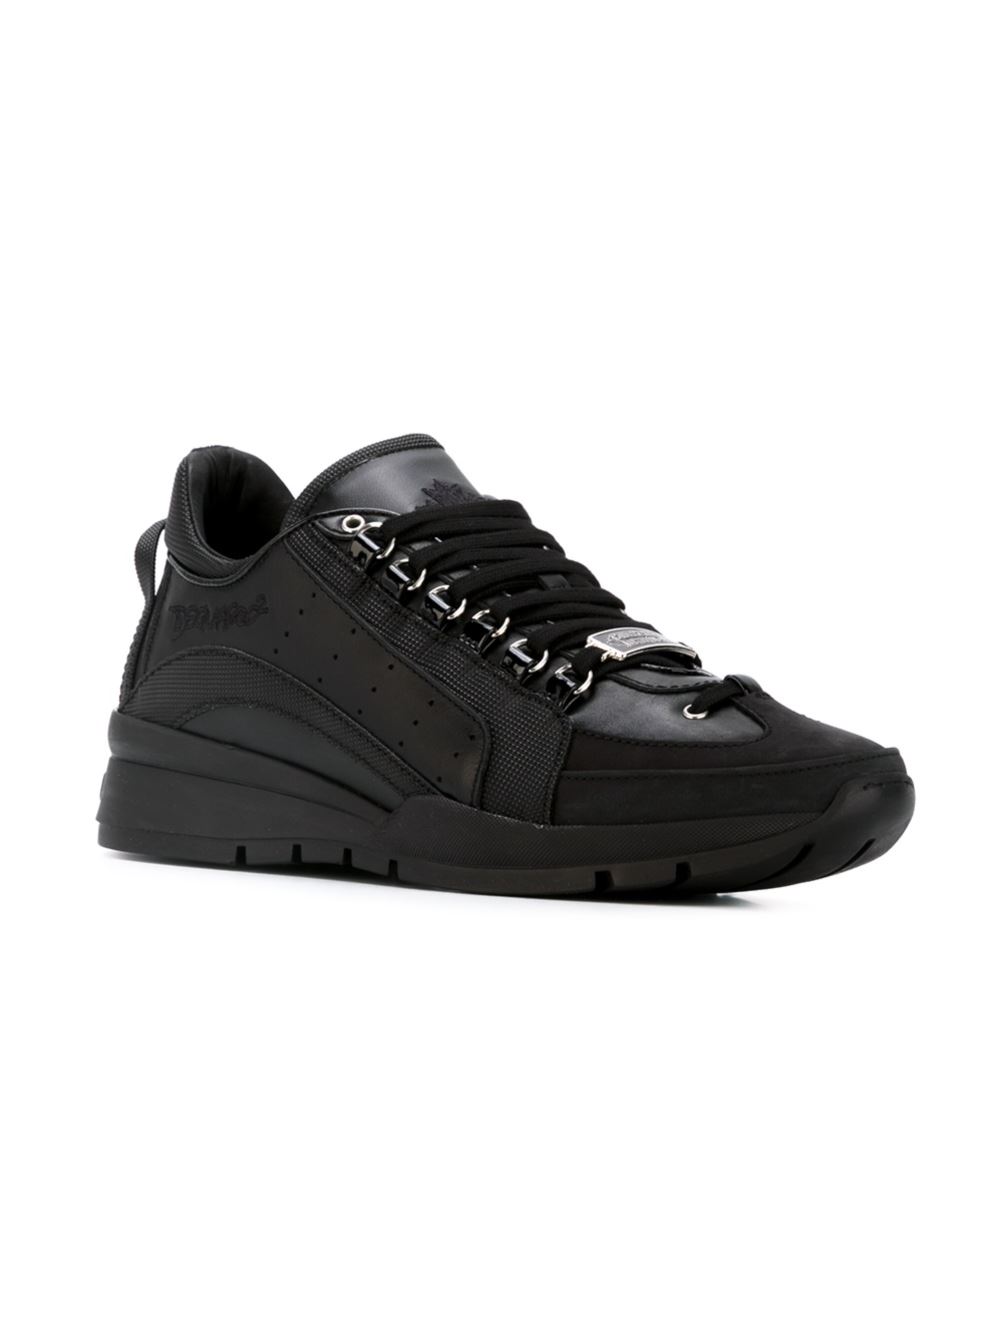 soldes sneakers dsquared